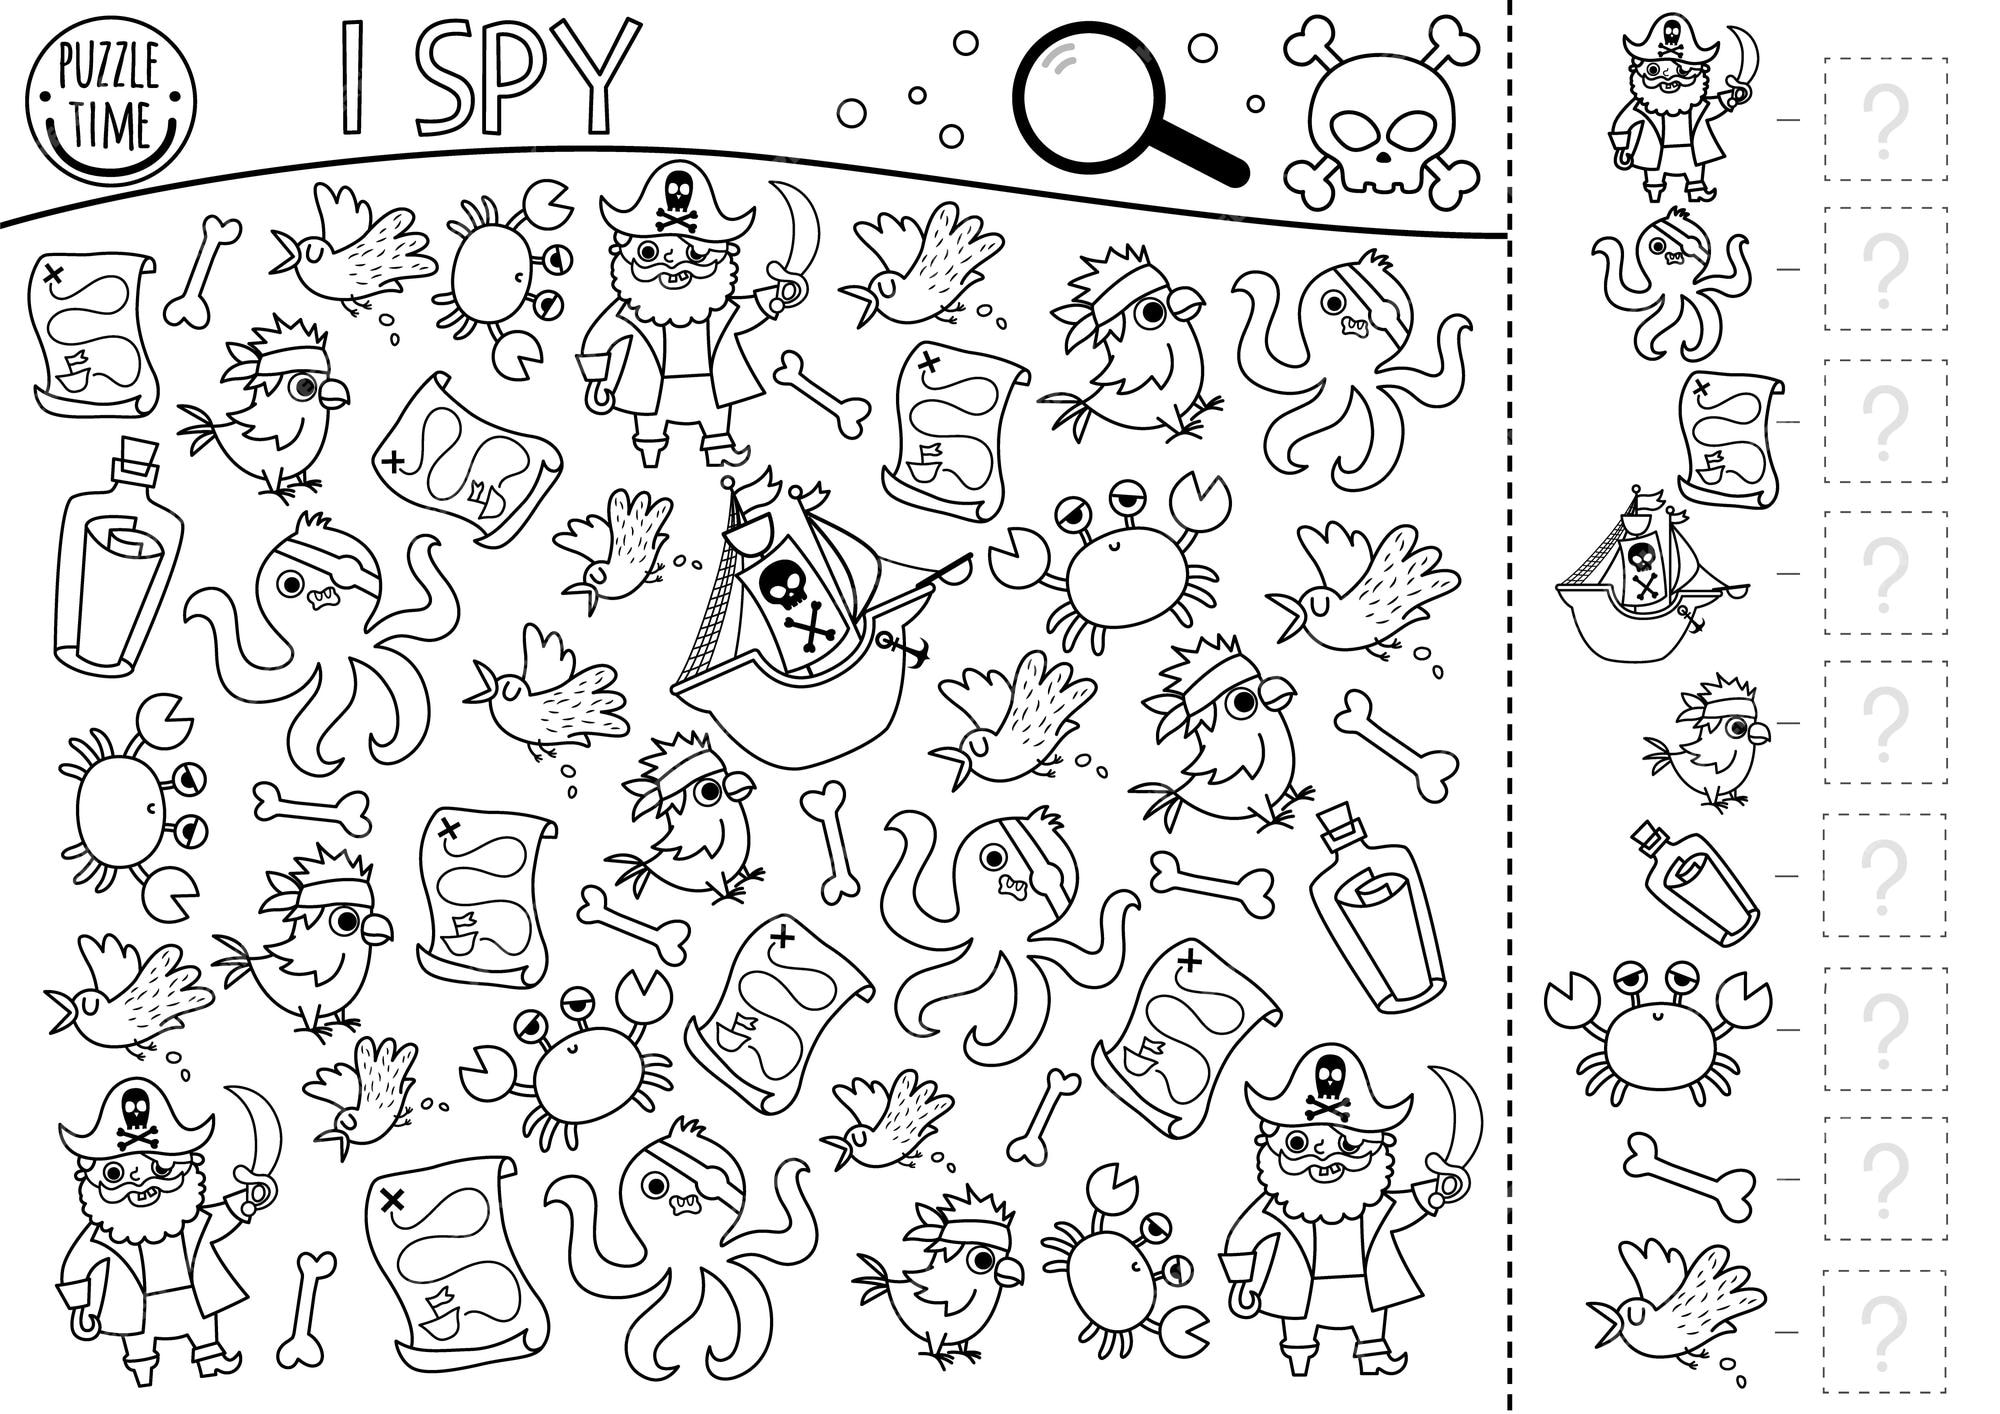 Premium vector pirate black and white i spy game for kids searching and counting activity with pirates animals birds treasure island hunt printable coloring page simple sea adventure spotting worksheetxa